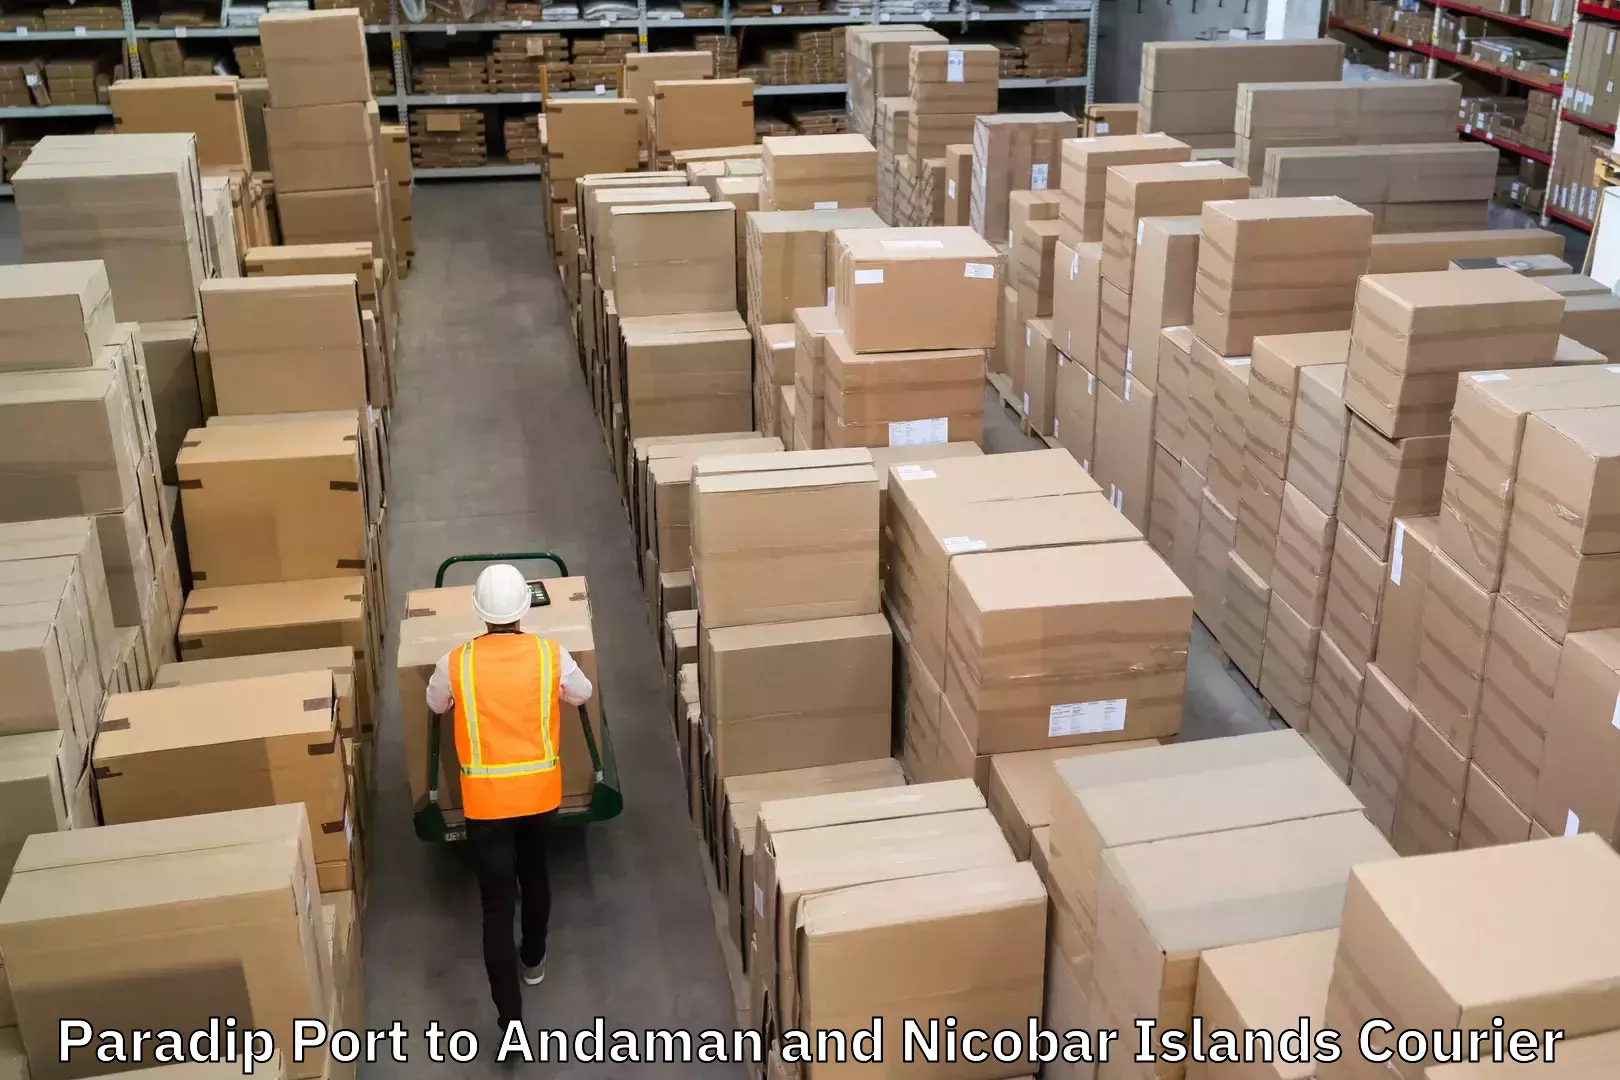 Multi-national courier services Paradip Port to Andaman and Nicobar Islands